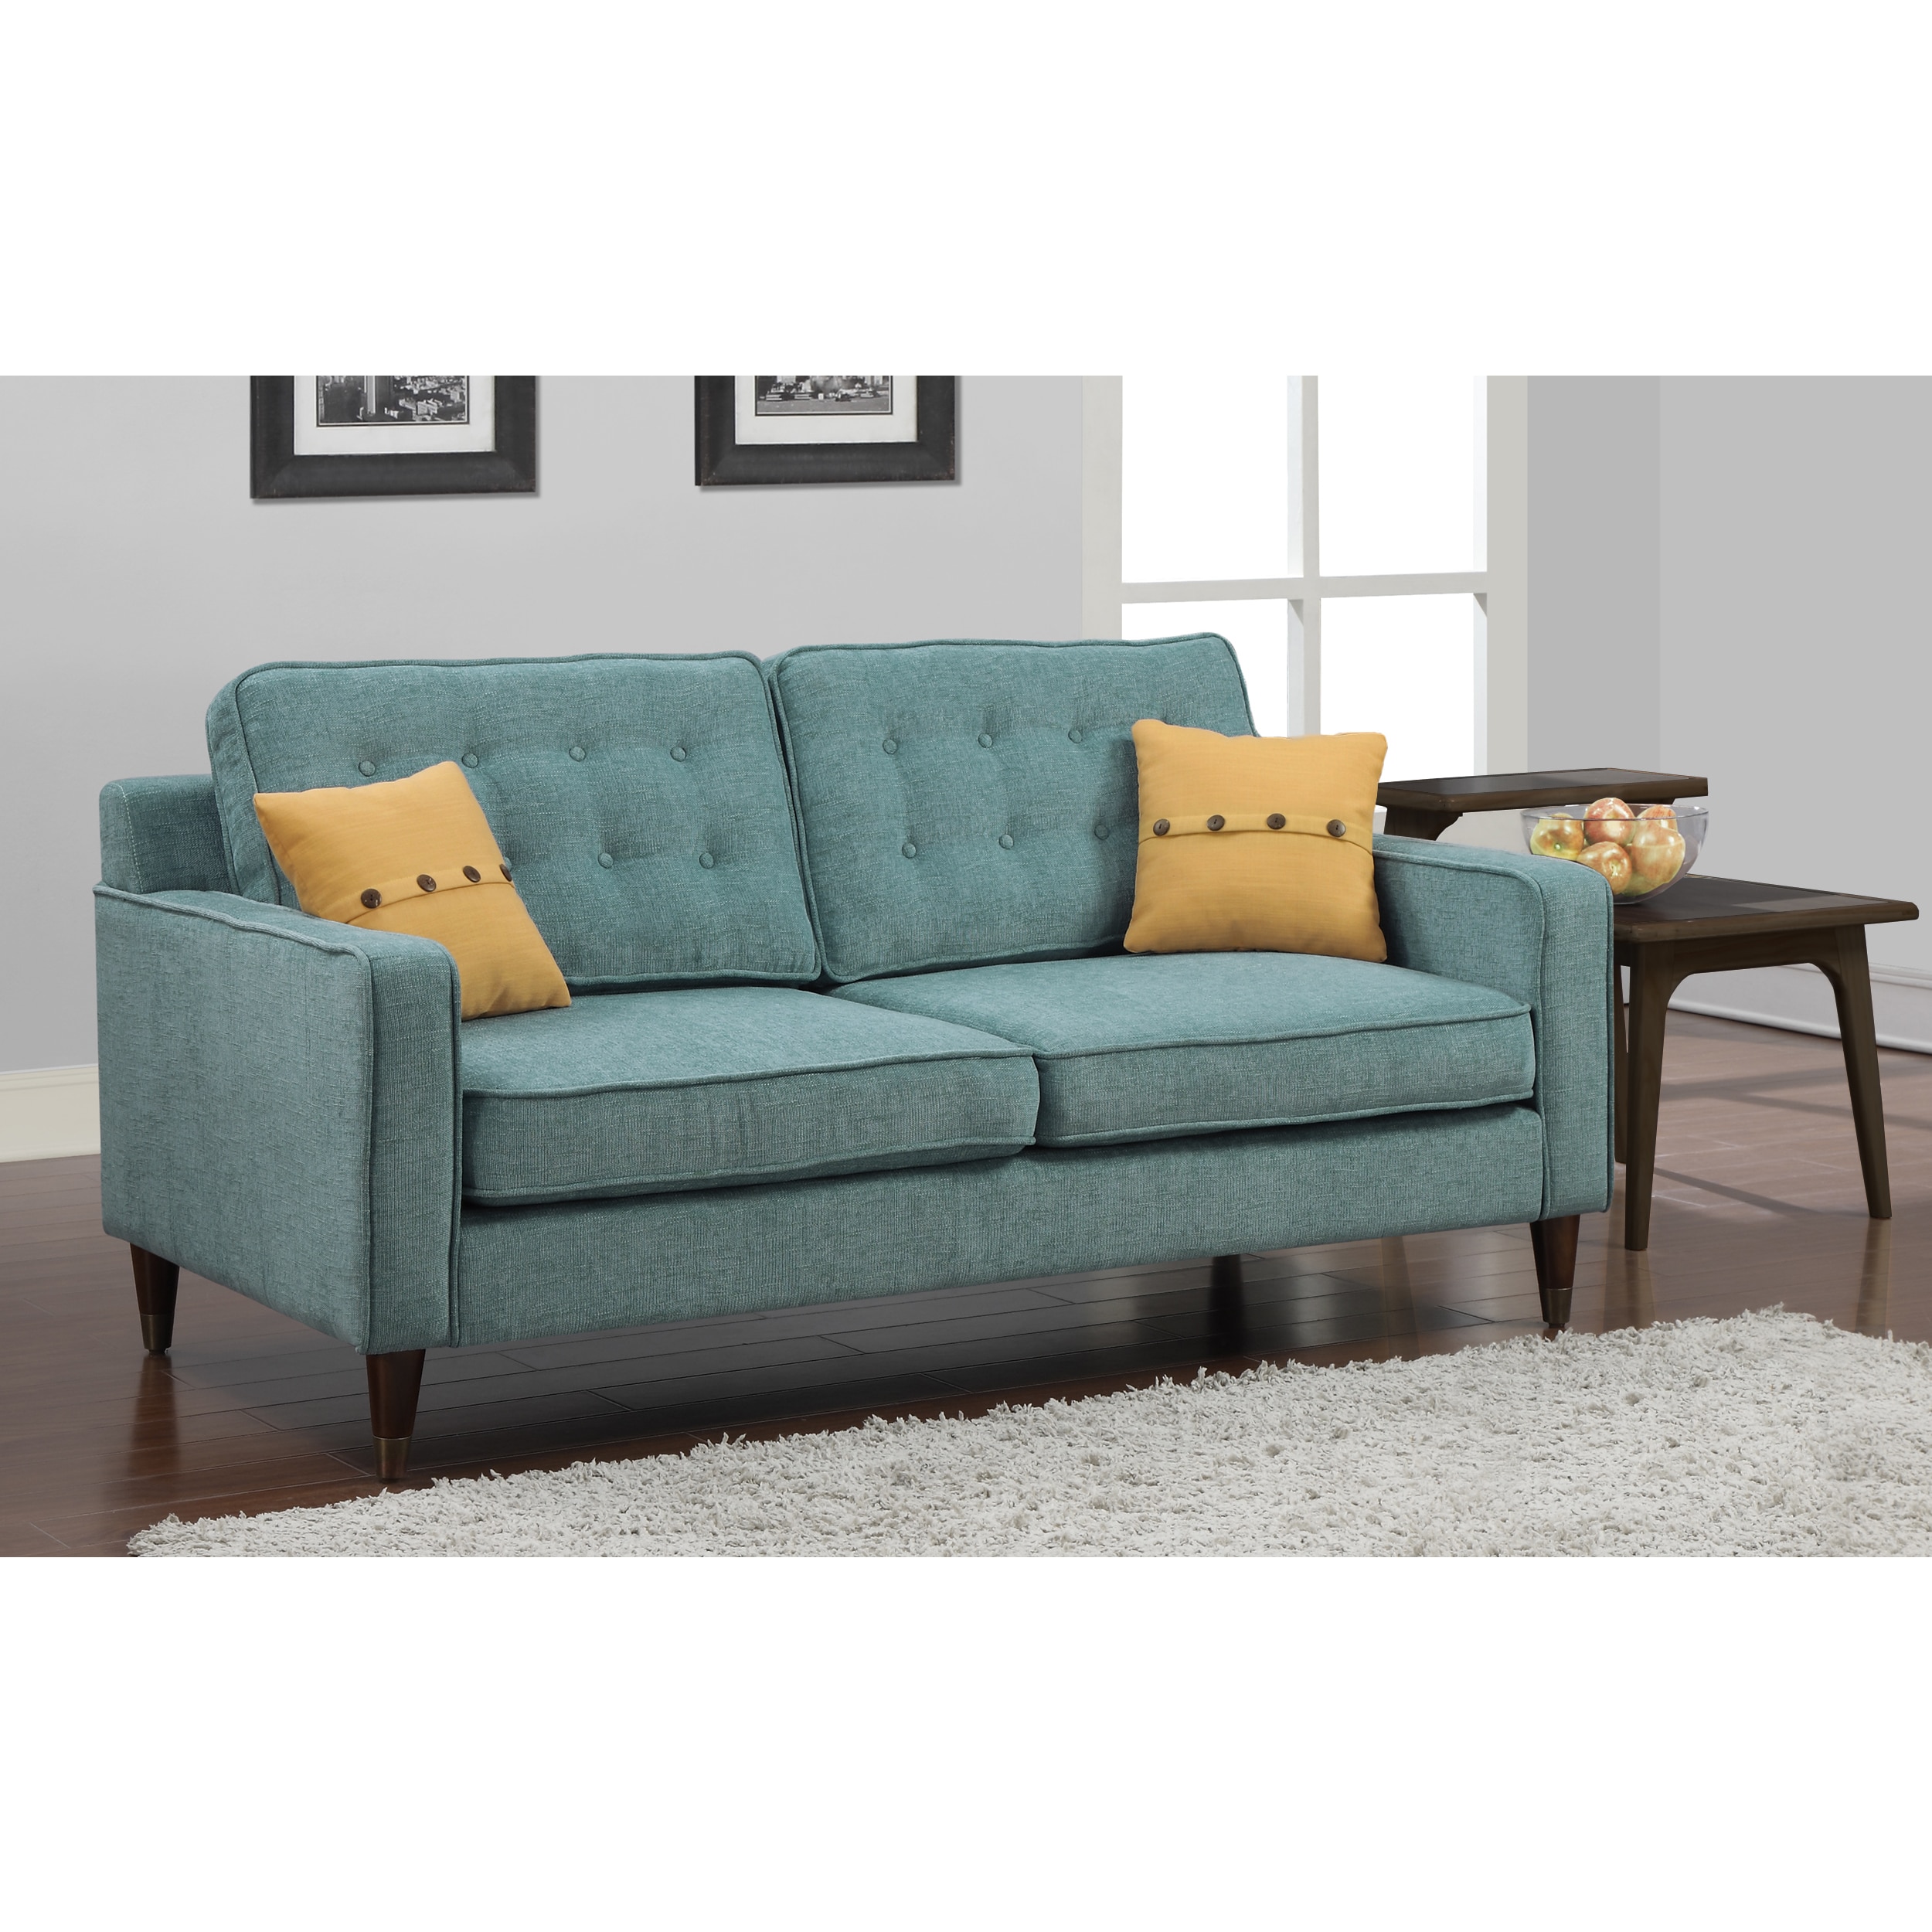 Jackie Aqua Sofa With French Yellow Button Pillow